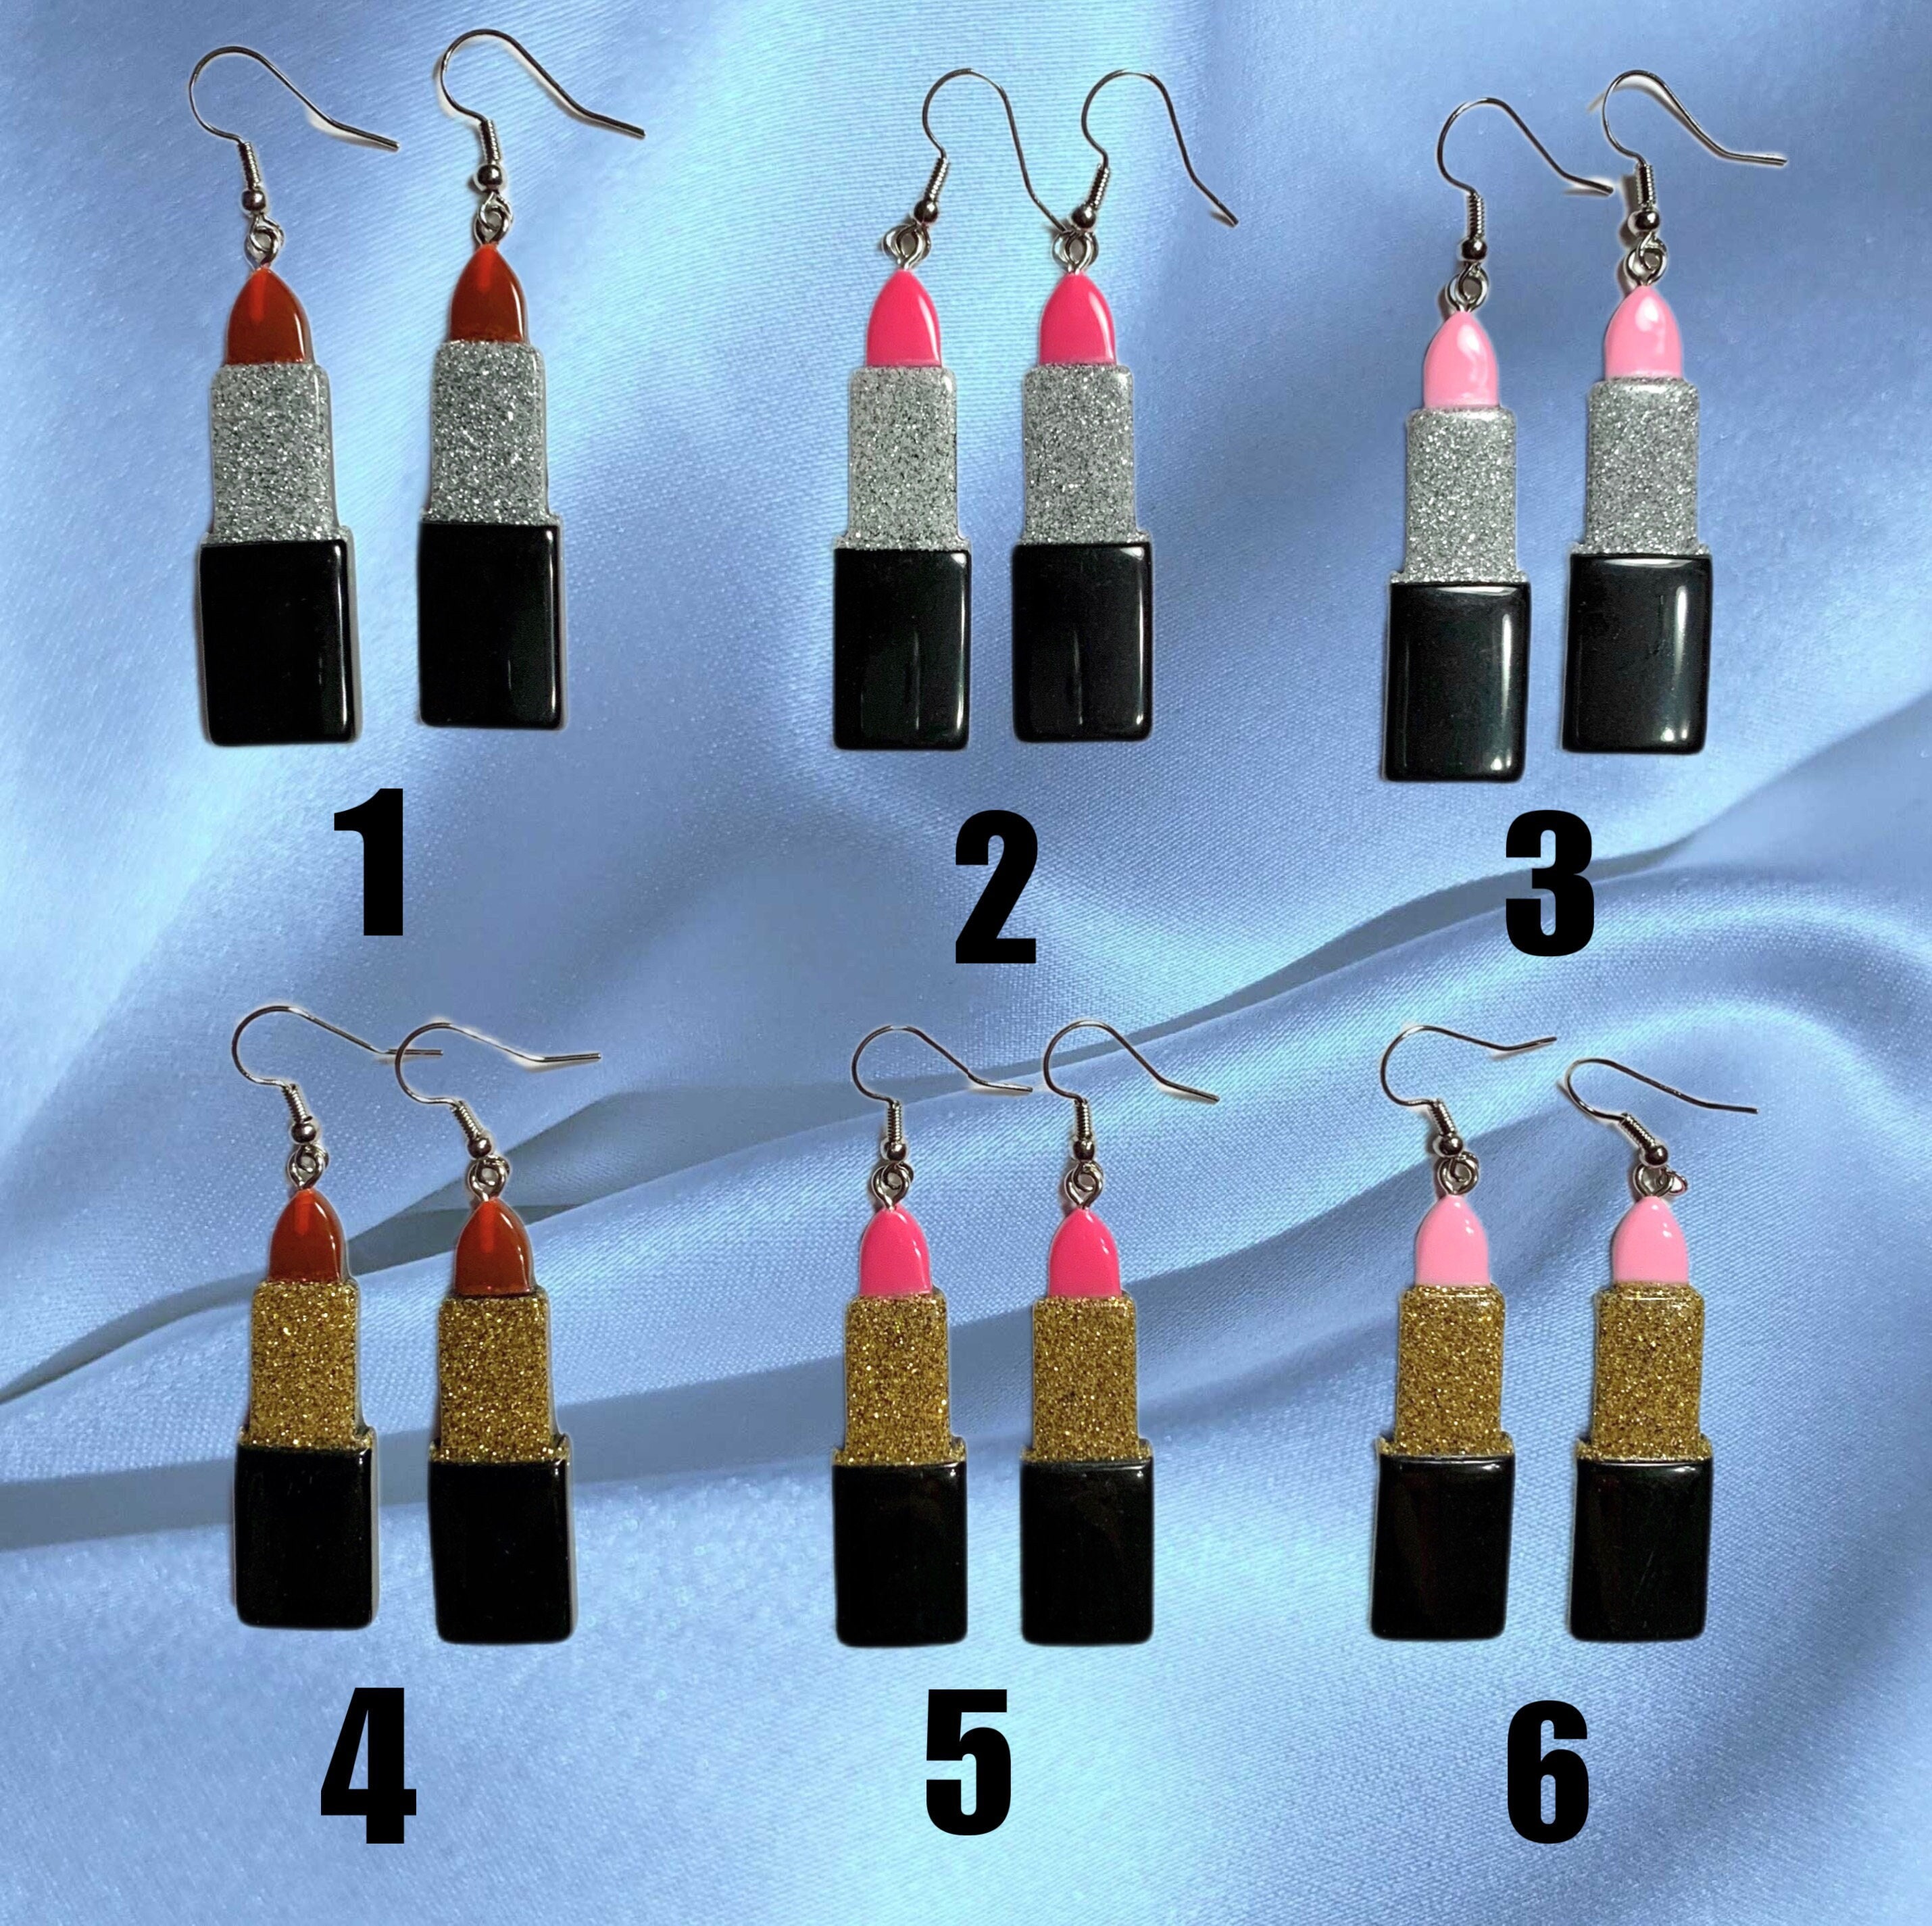 Buy Cyruss Acrylic Mouth Lipstick Style Long Dangle Earrings for Women  Party Gifts at .in